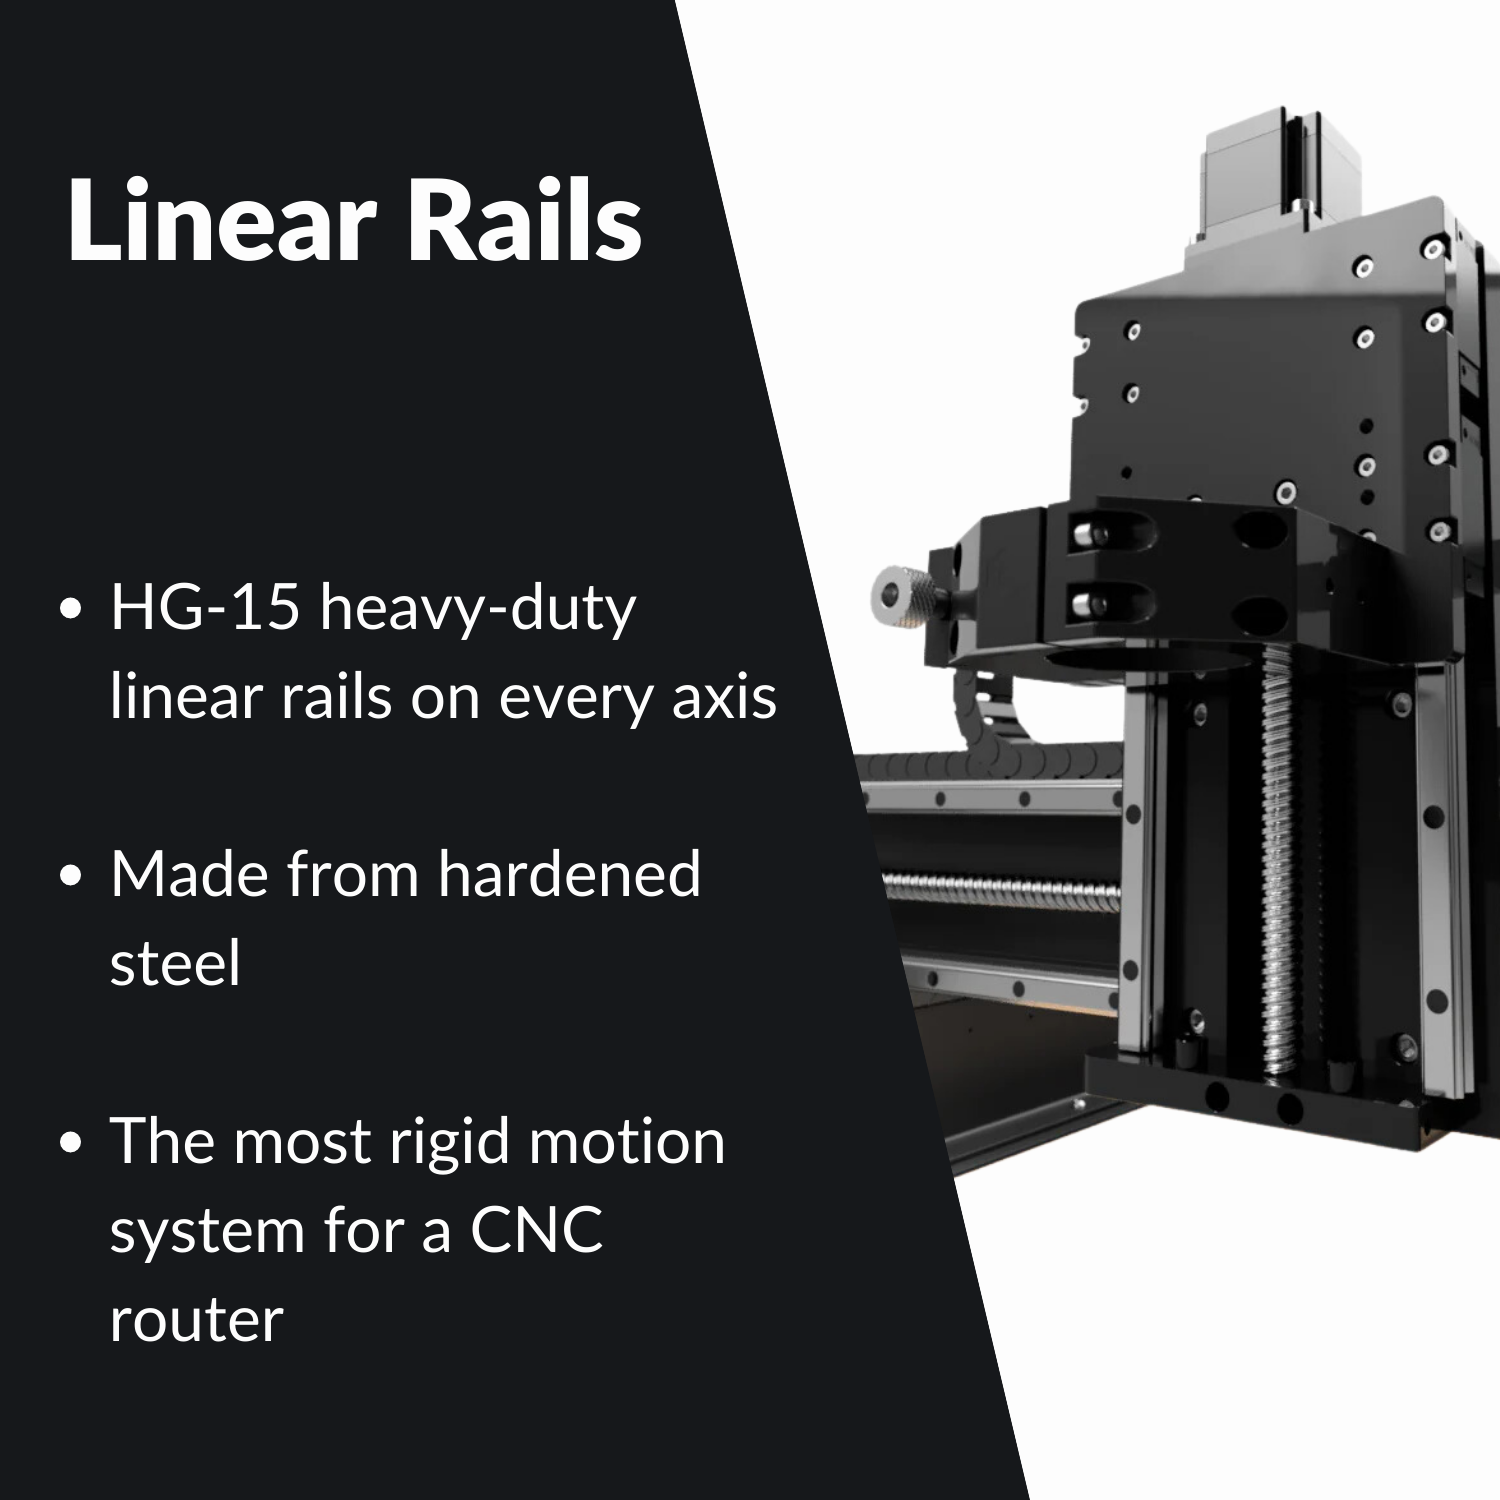 Linear rails on every axis